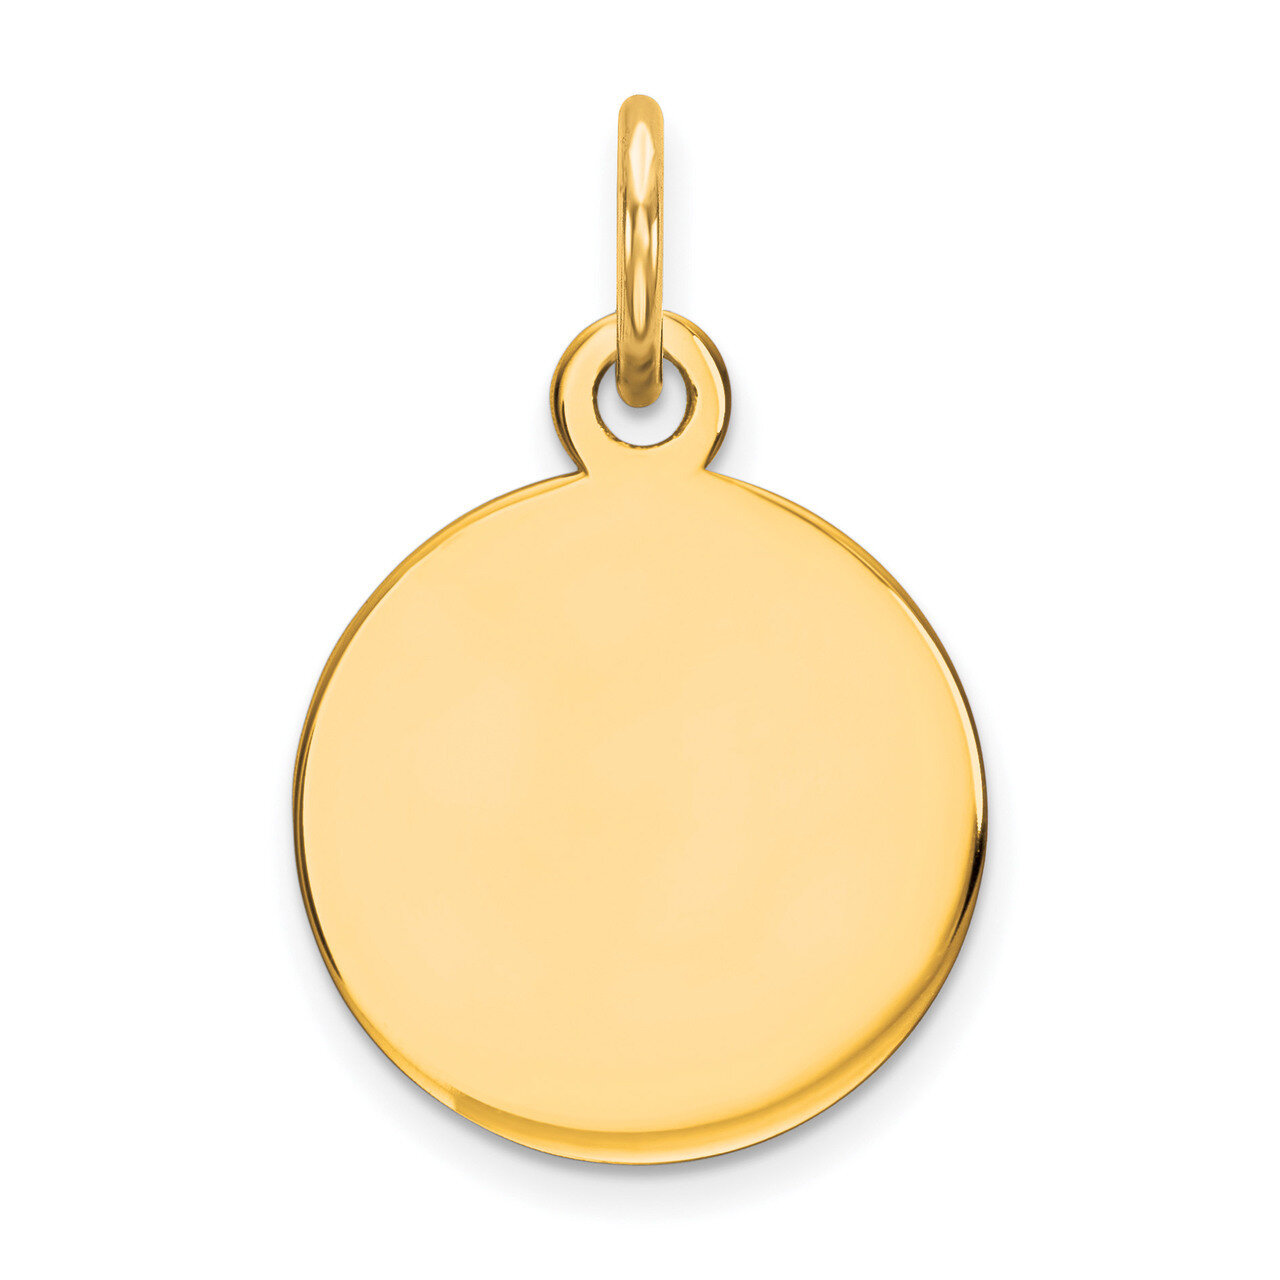 Engravable Round Polished Disc Charm Sterling Silver Gold-plated QM497G/35